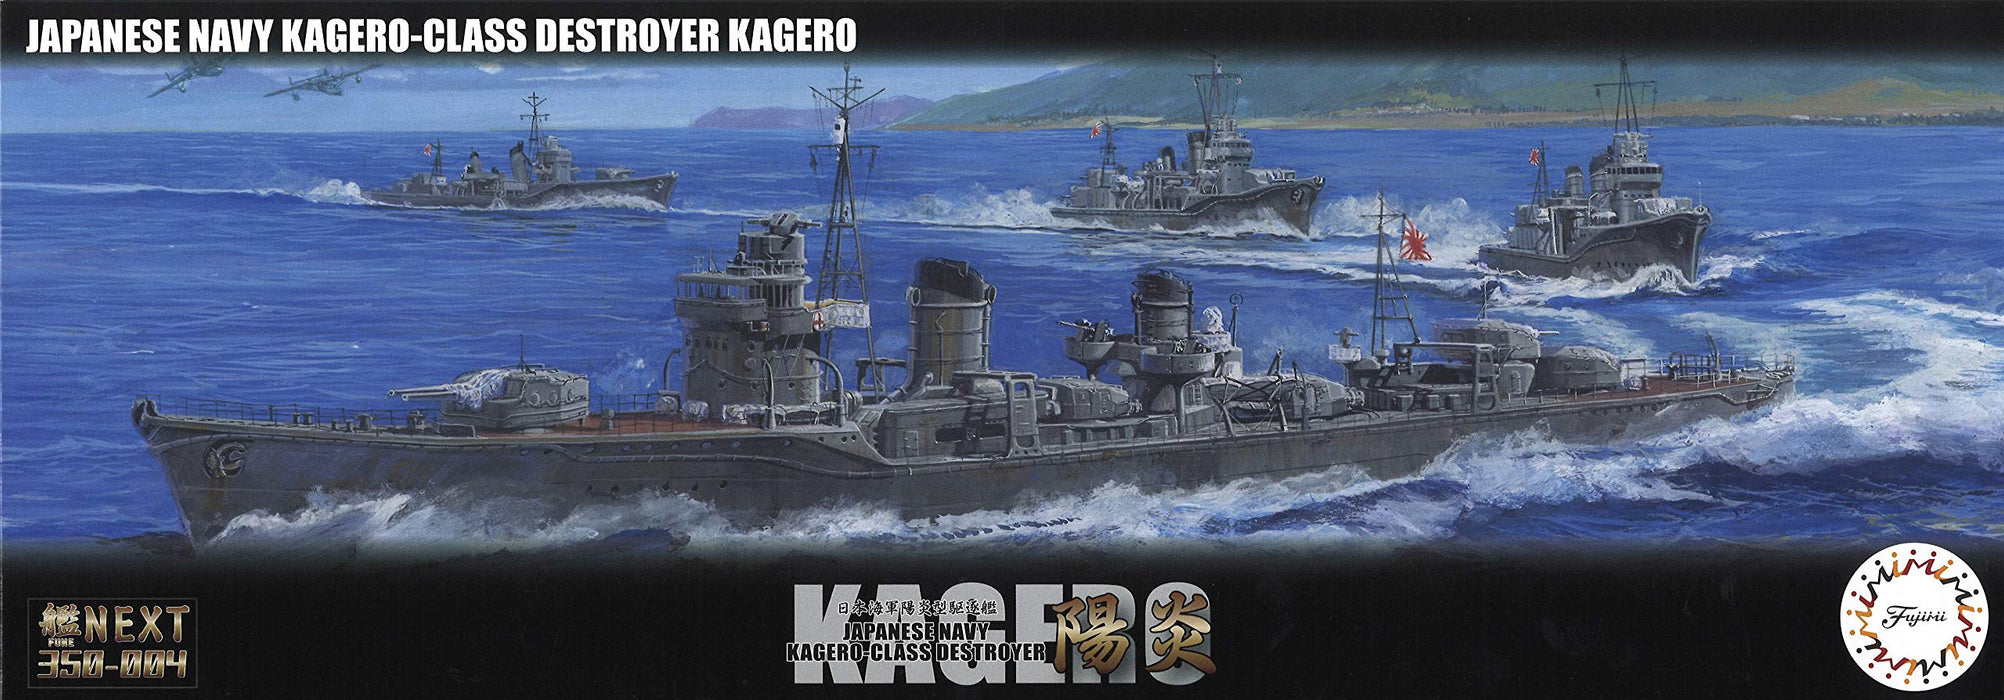 Fujimi Model 1/350 Ship Next Series No.4 Japanese Navy Kagerou Destroyer Kagero Color Coded Plastic Model 350 Ship Nx-4